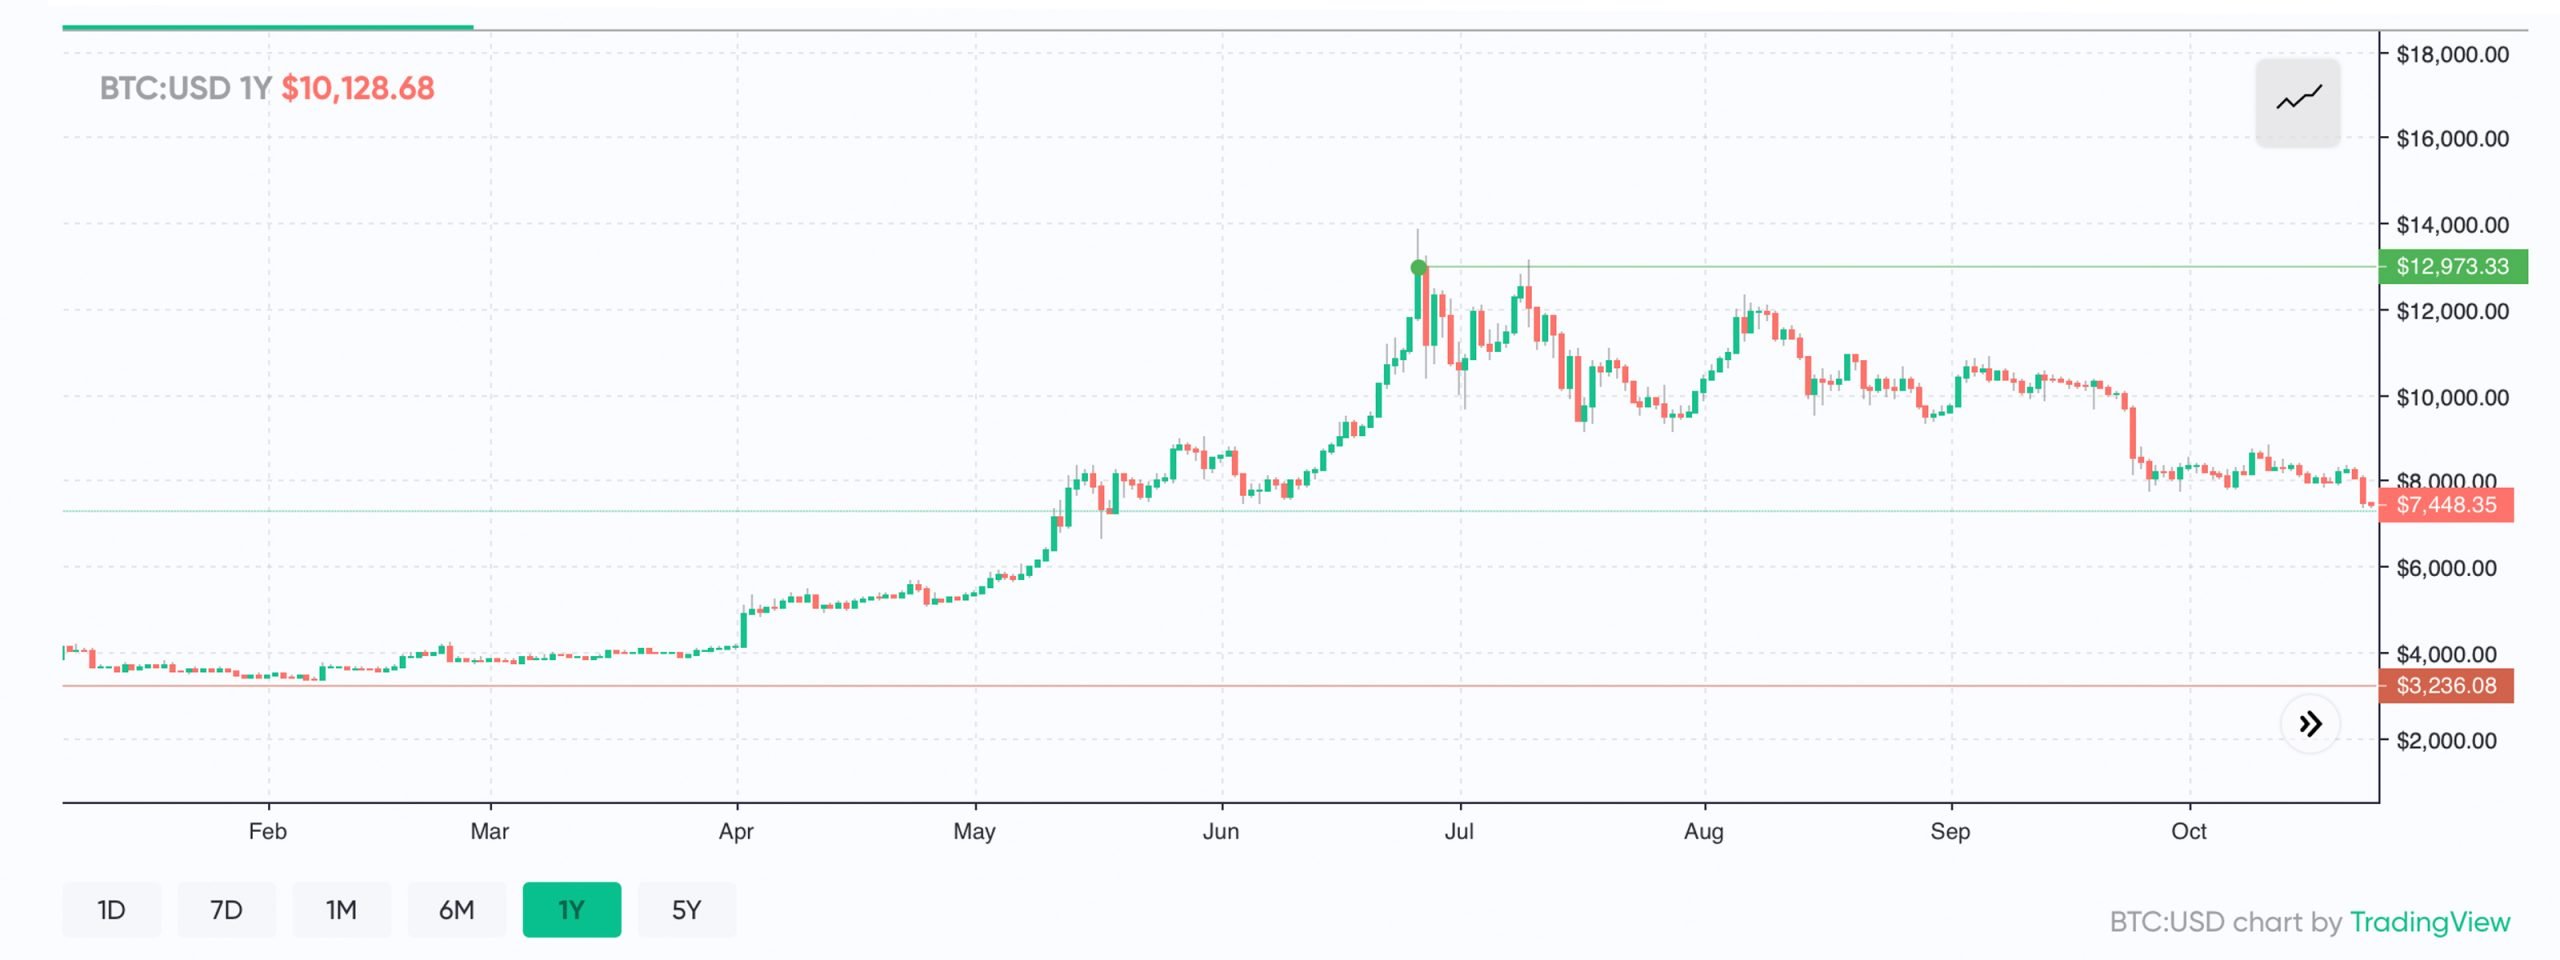 Despite the Recent Slump, Crypto Prices Improved a Great Deal in 2019